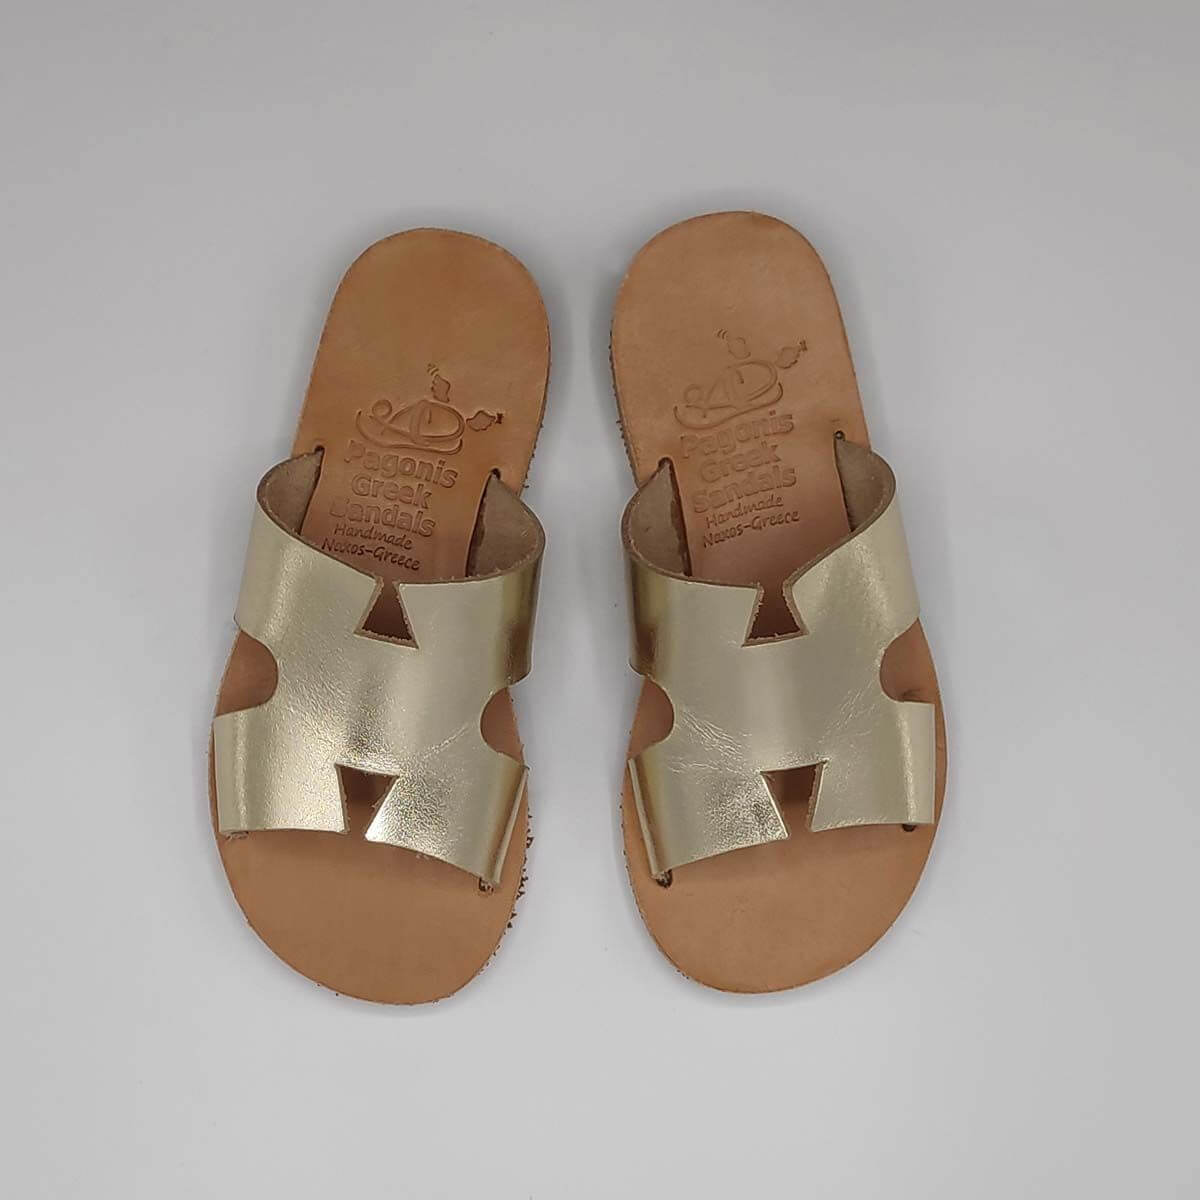 Kids Leather Slippers | Hermes Kids Sandals Leather Sandals | Pagonis Greek  Sandals